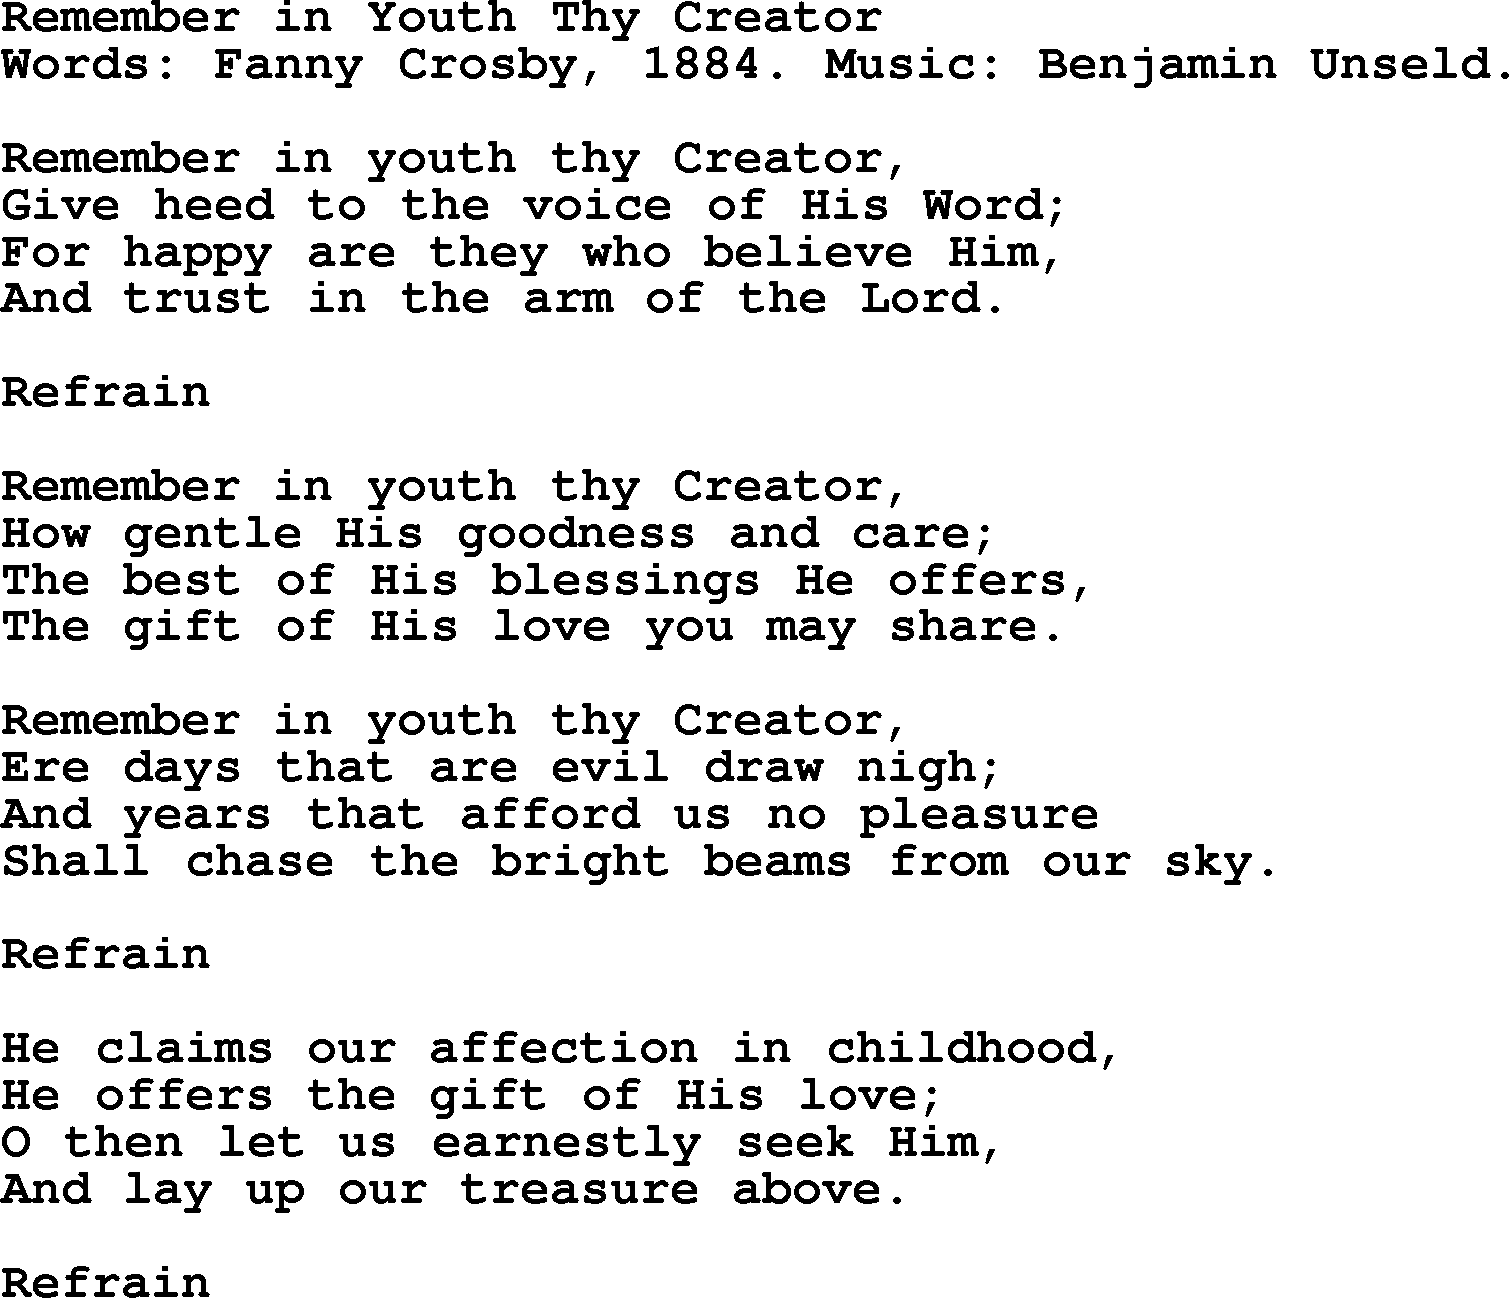 Fanny Crosby song: Remember In Youth Thy Creator, lyrics